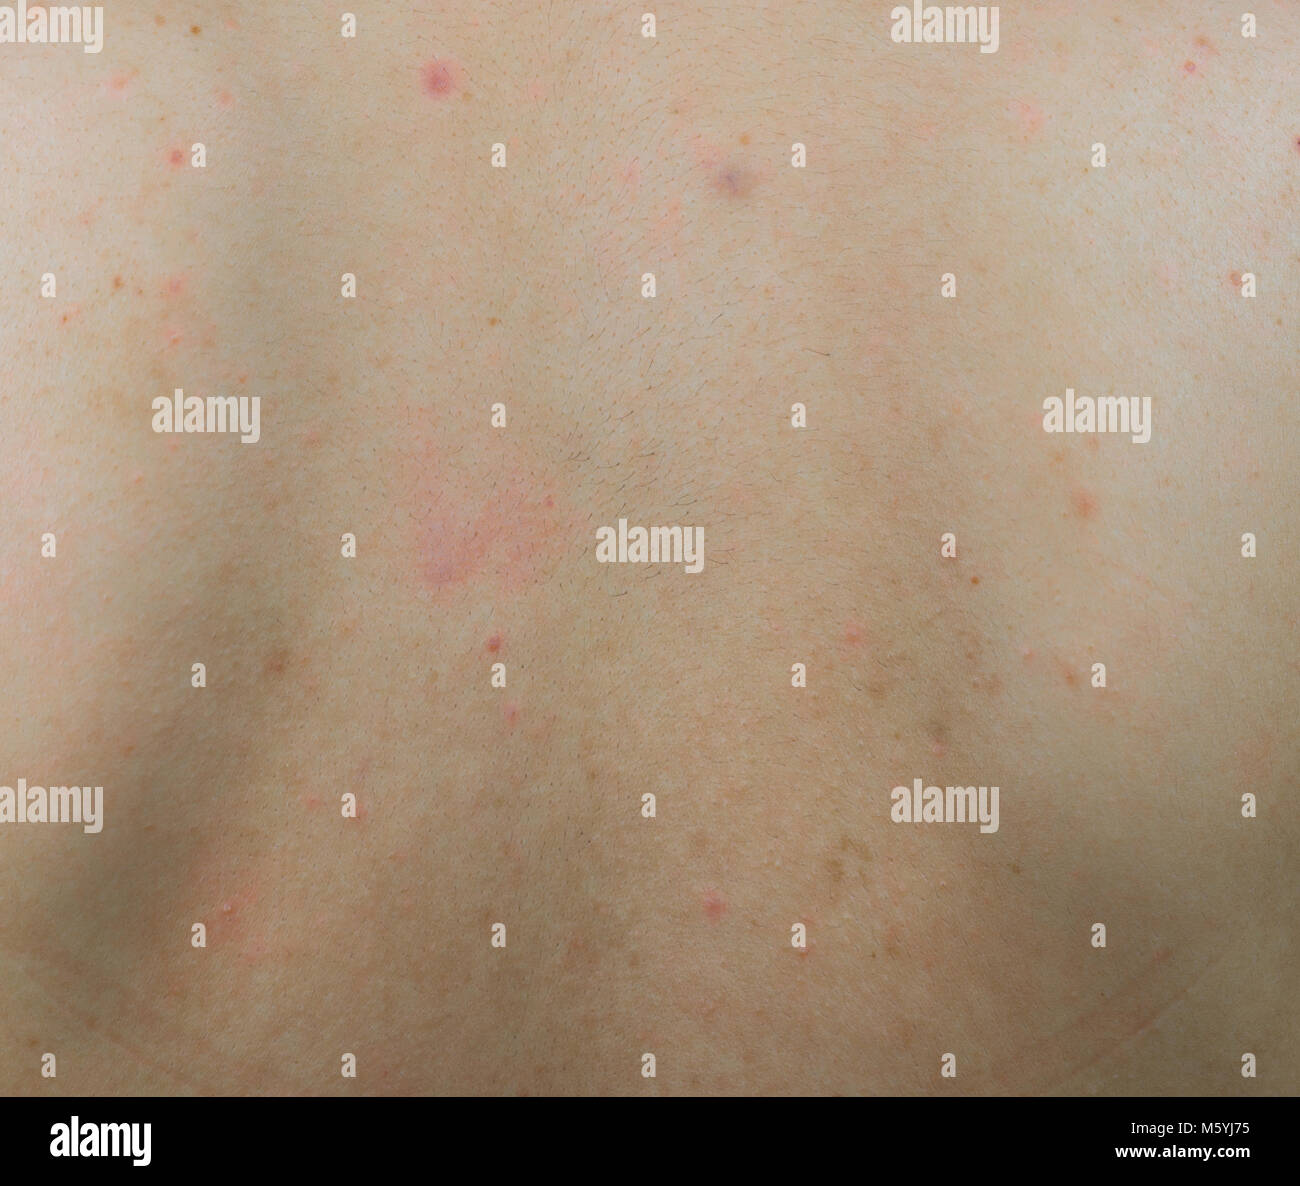 Closeup of acne on back with red spot and dark brown spot on woman back skin. Stock Photo